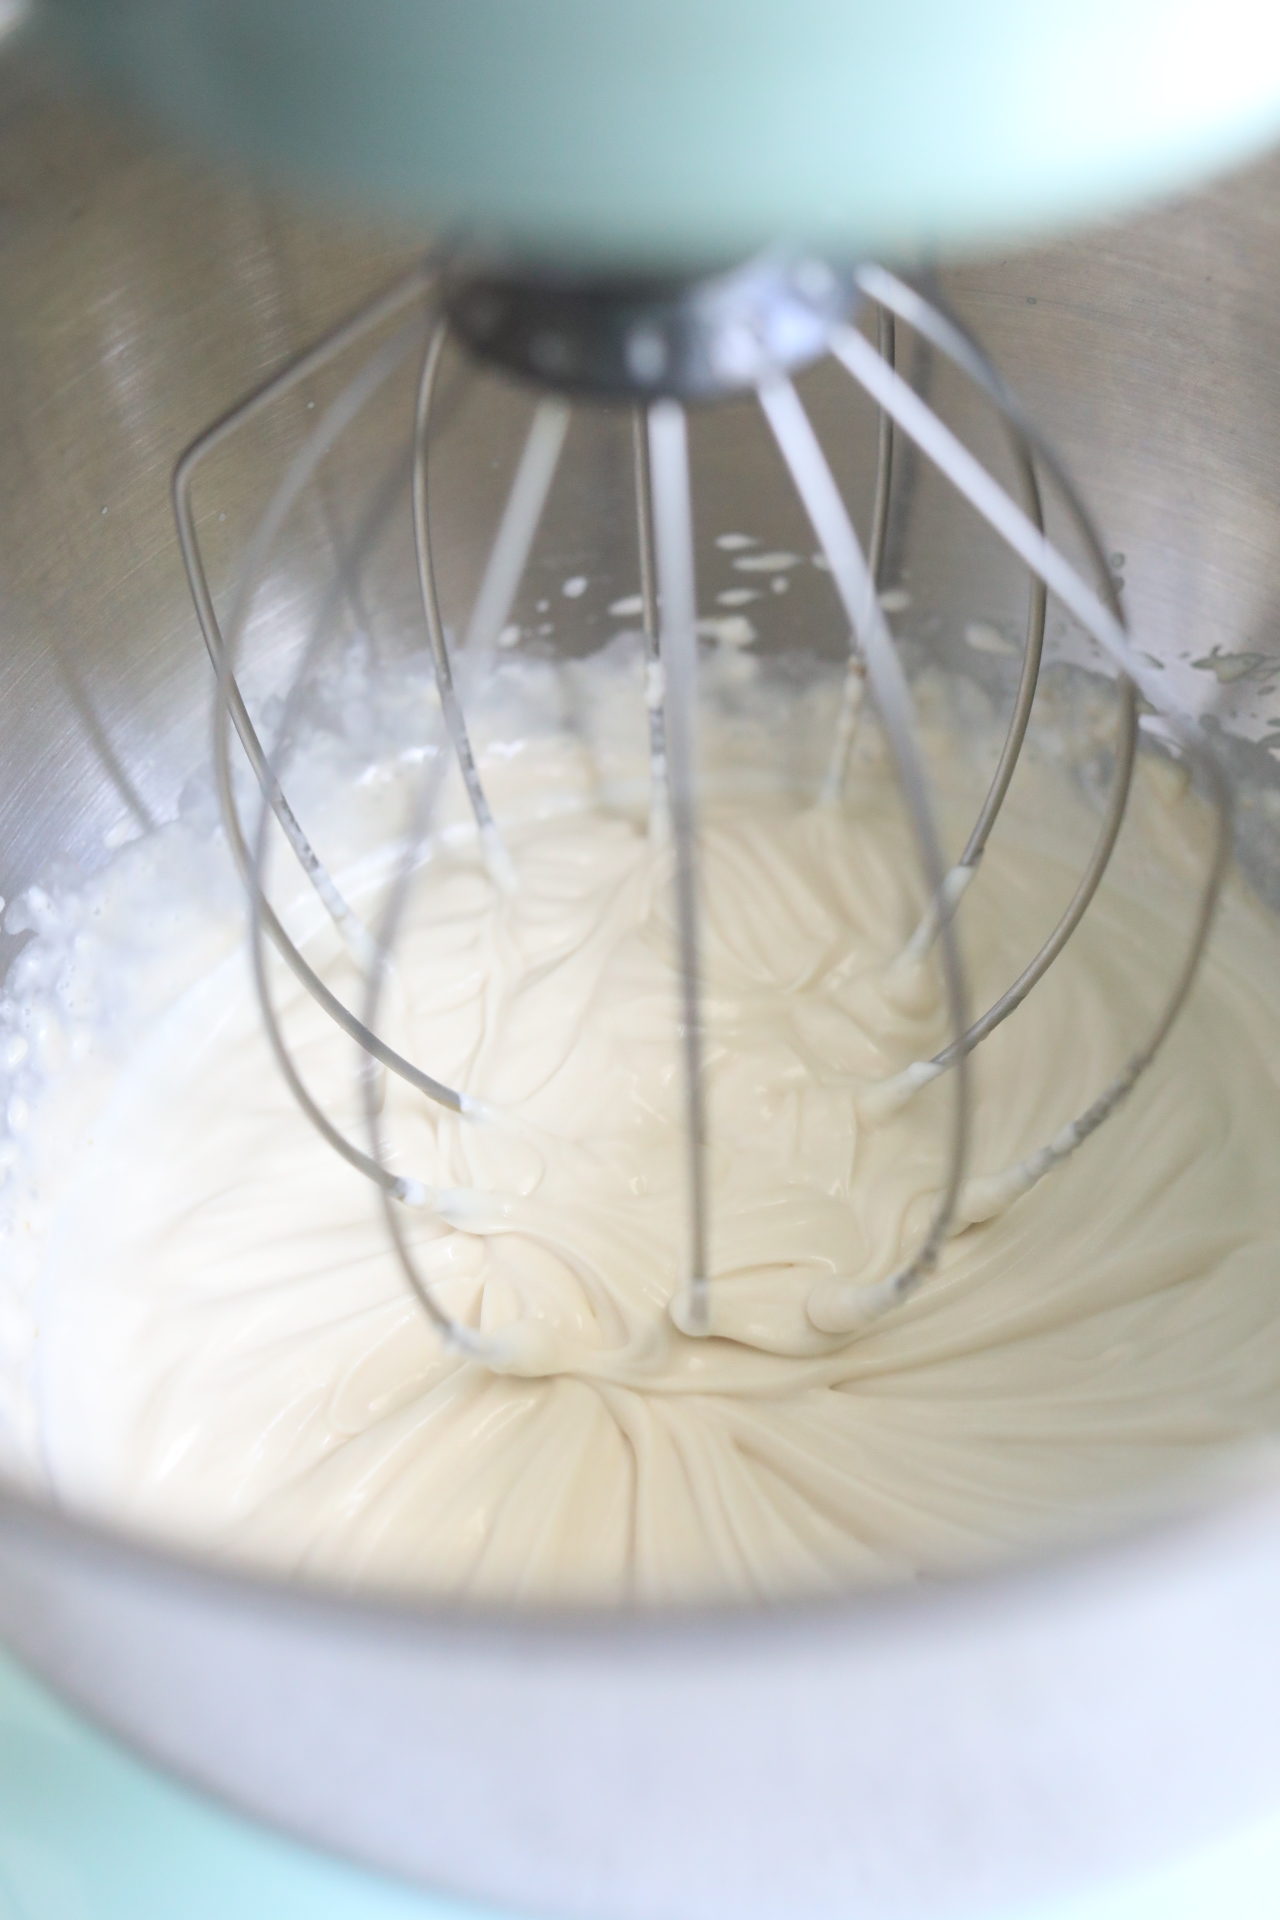 Whipped yogurt in stand mixer whipped showing fluffy consistency with whisk attached.